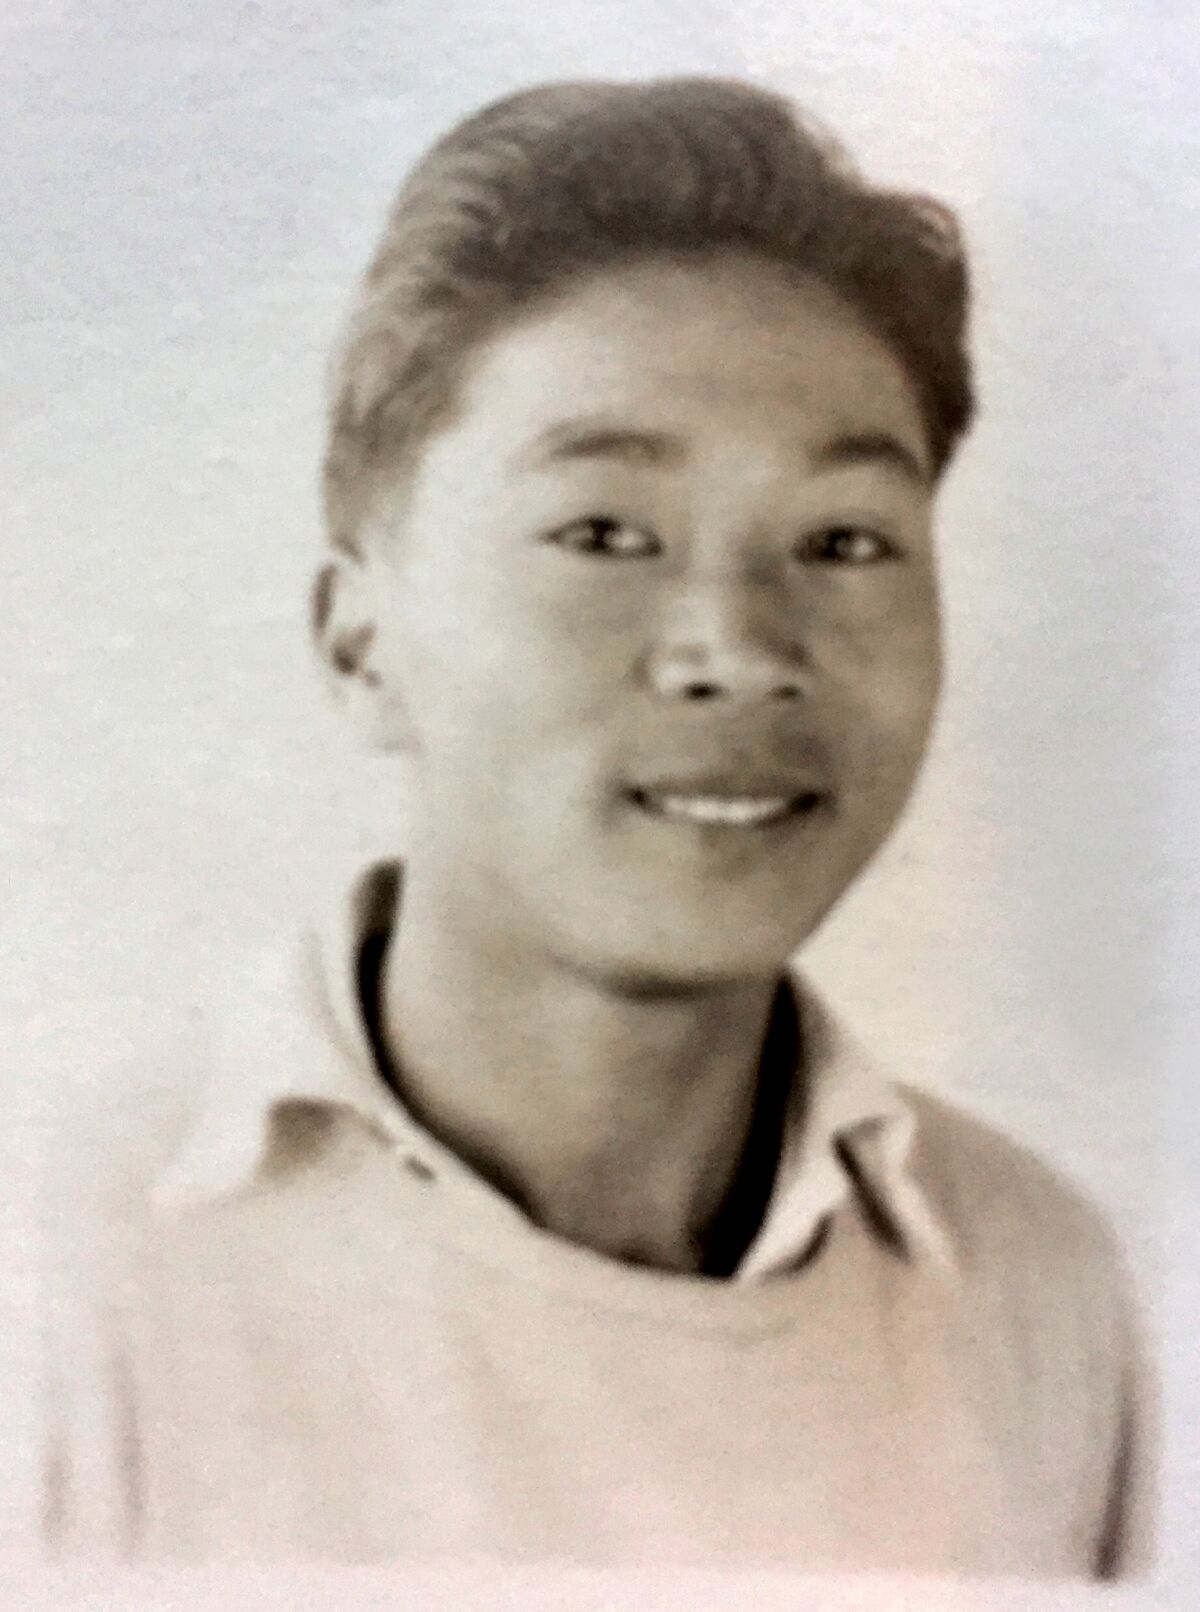 A portrait of the author's father as a teenager.